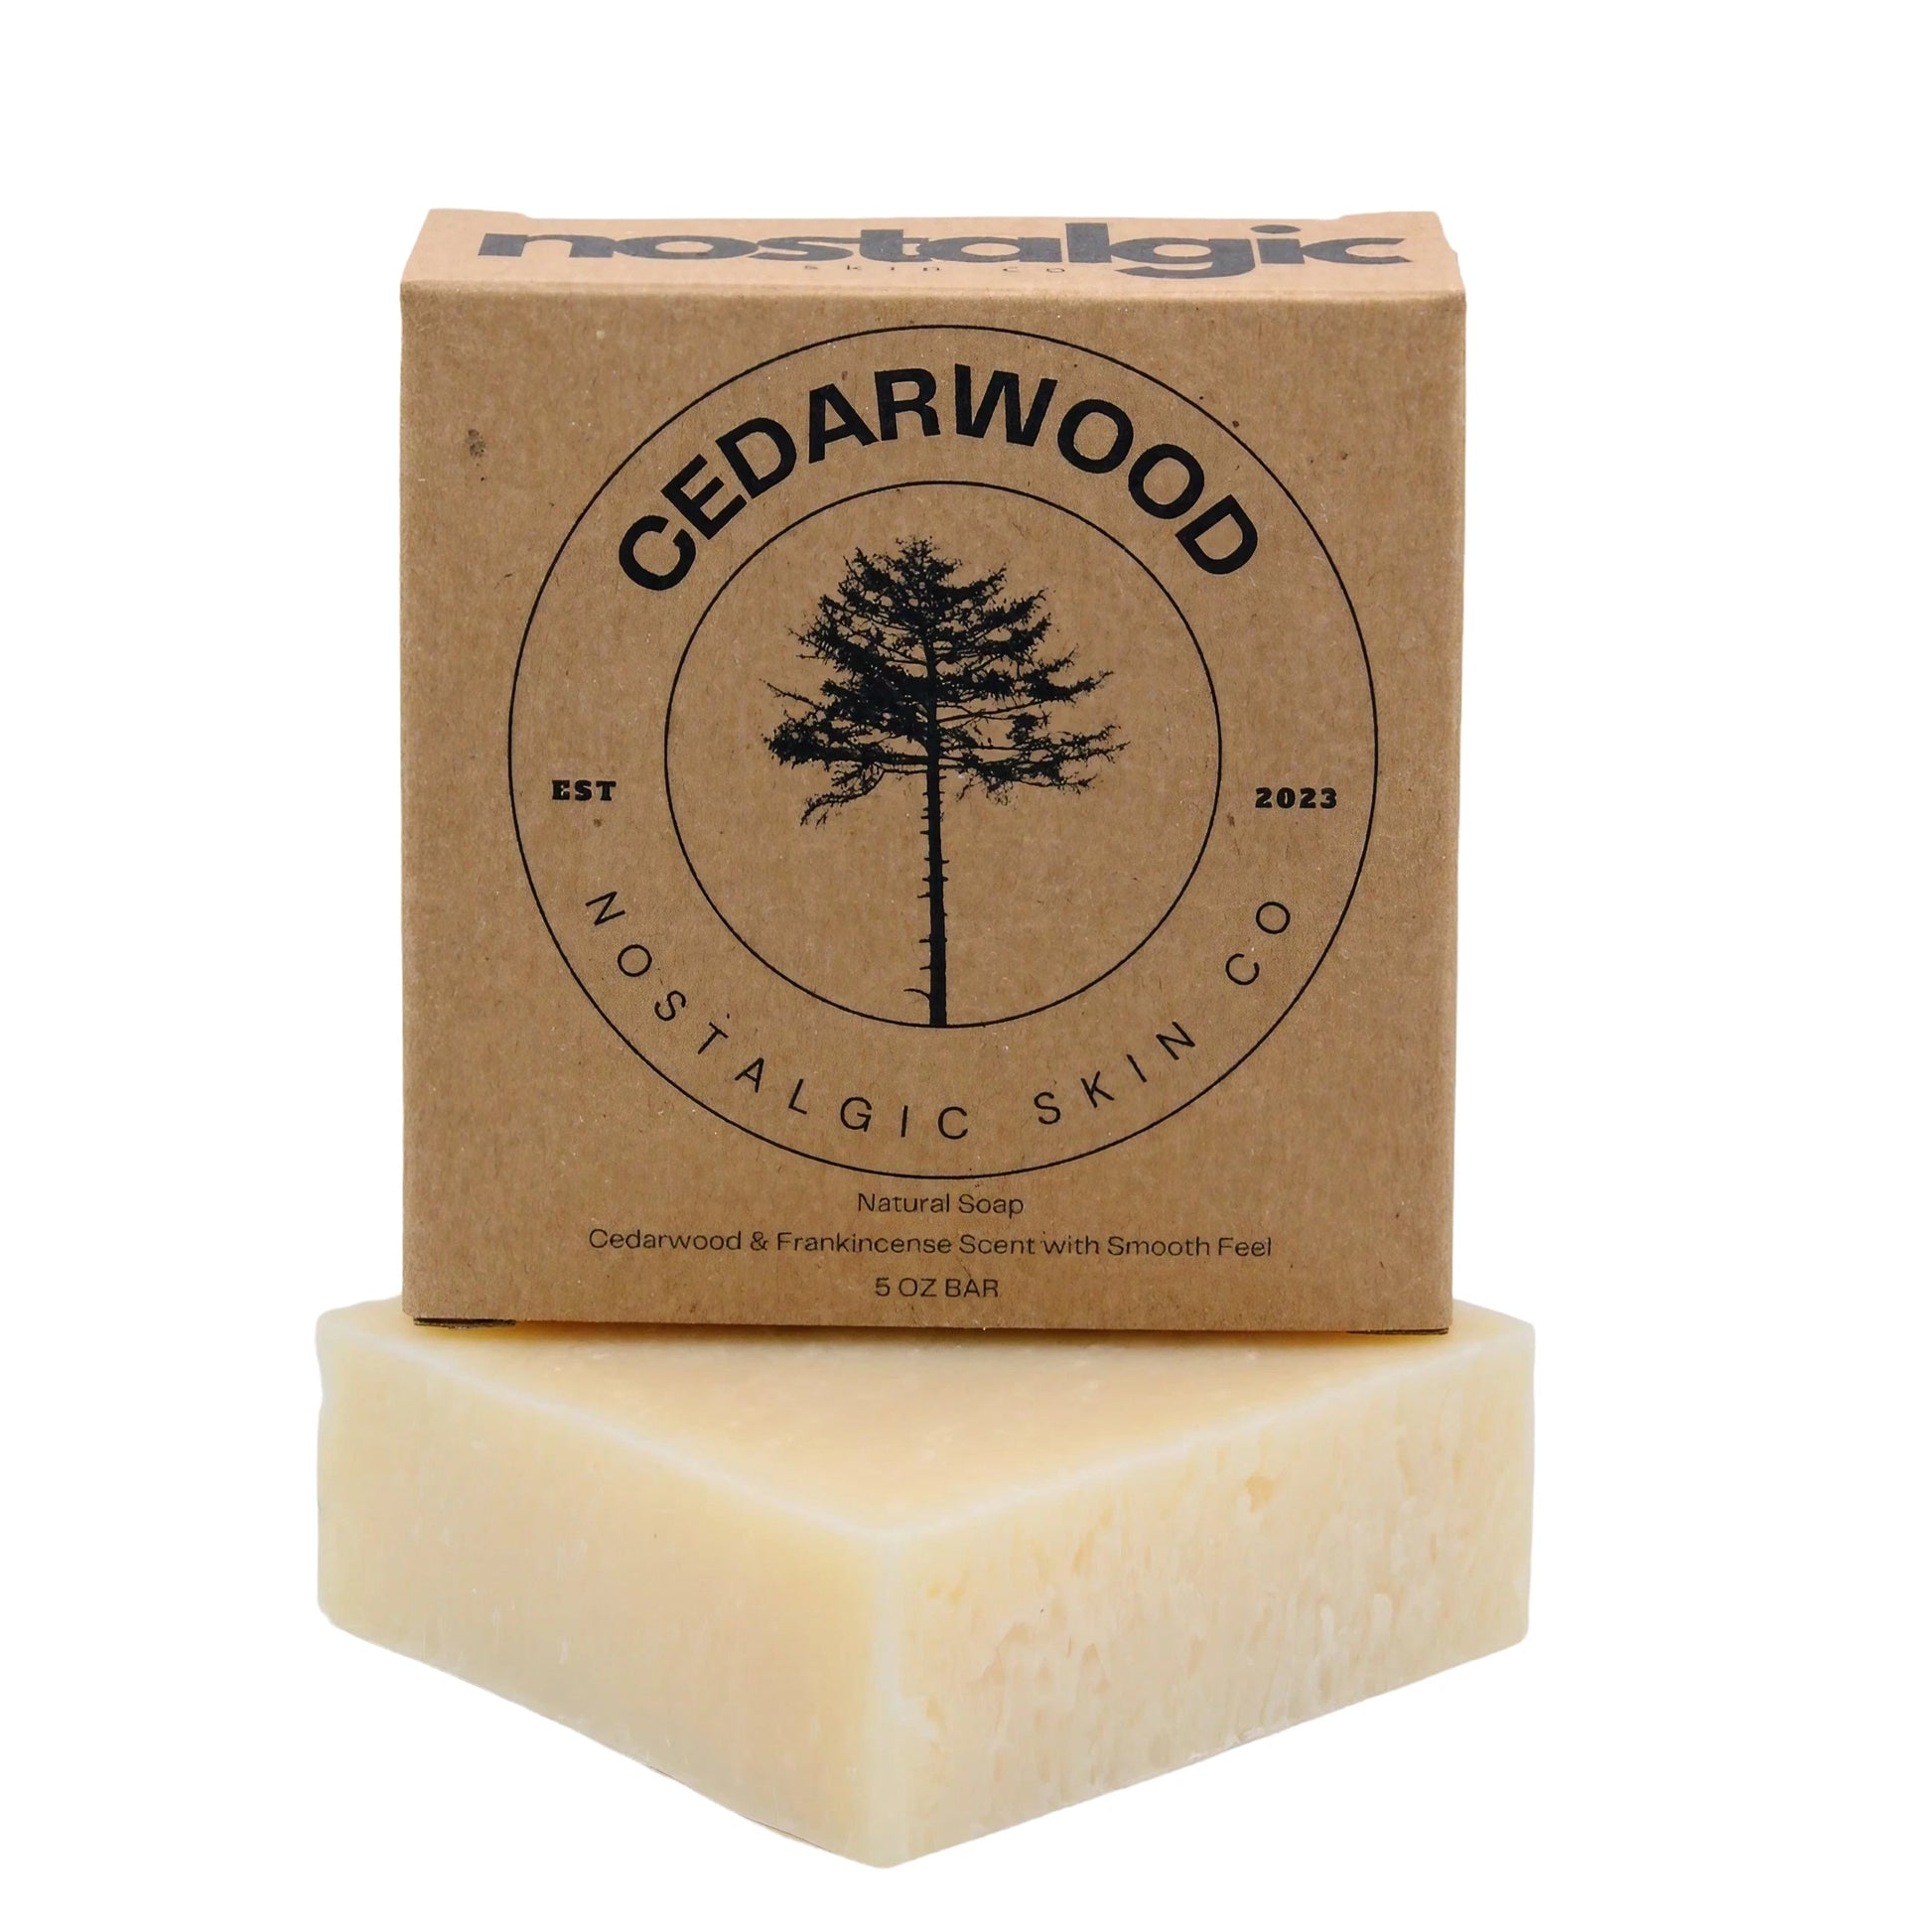 Organic Soap for Men - Natural Cedarwood and Handmade for a Healthy Glow - Nostalgic Skin Co.